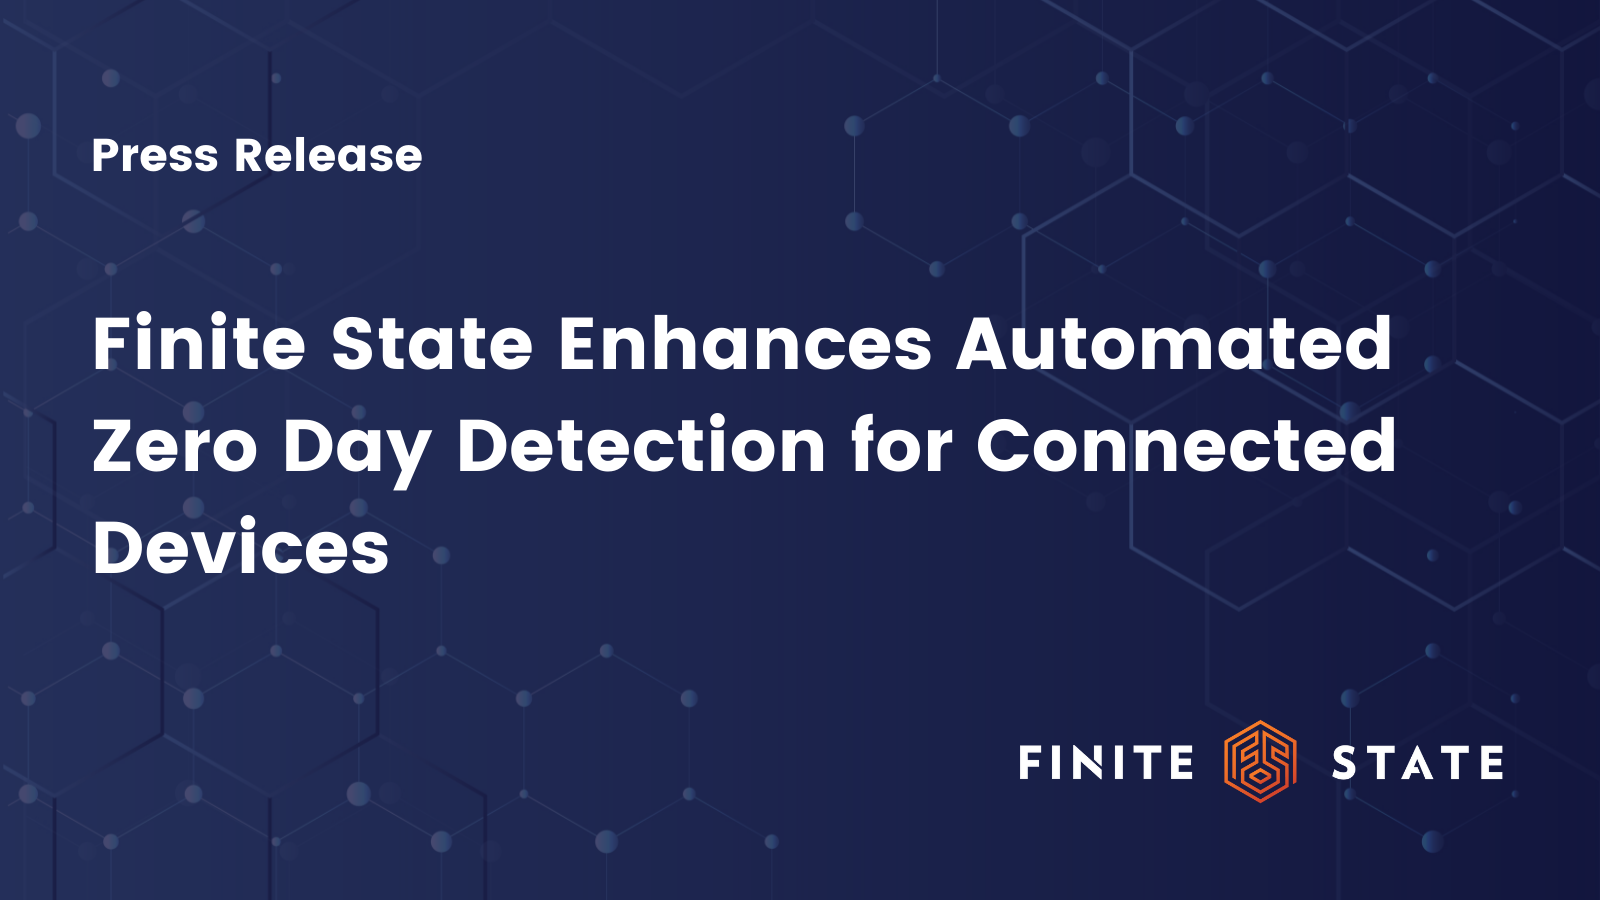 Image that displays press release headline: Finite State Enhances automated Zero Day Detection for Connected Devices